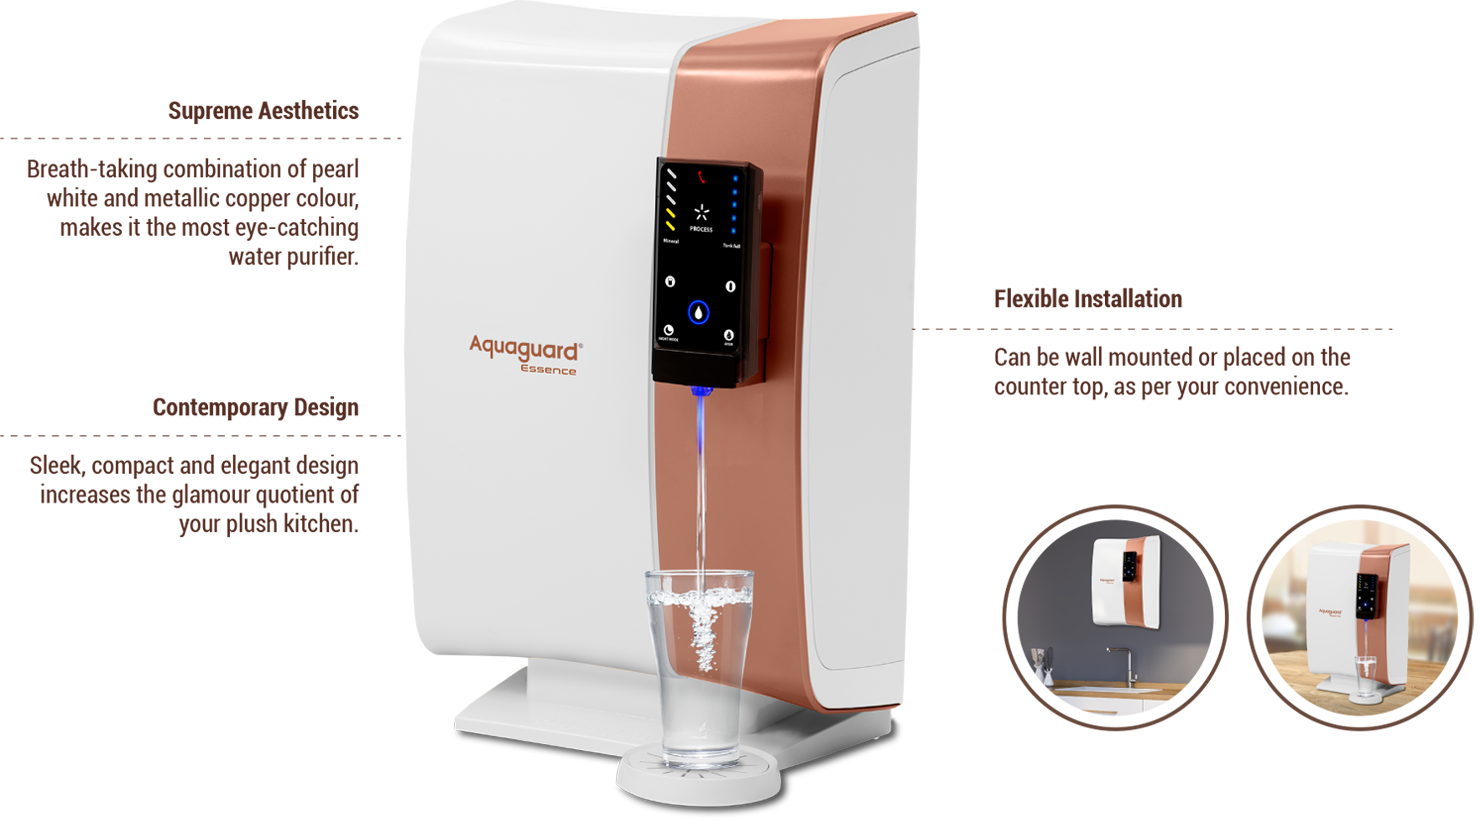 Breath-taking combination of pearl white and metallic copper colour, makes it the most eye-catching water purifier., Sleek, compact and elegant design increases the glamour quotient of your plush kitchen., Can be wall mounted or placed on the counter top, as per your convenience.